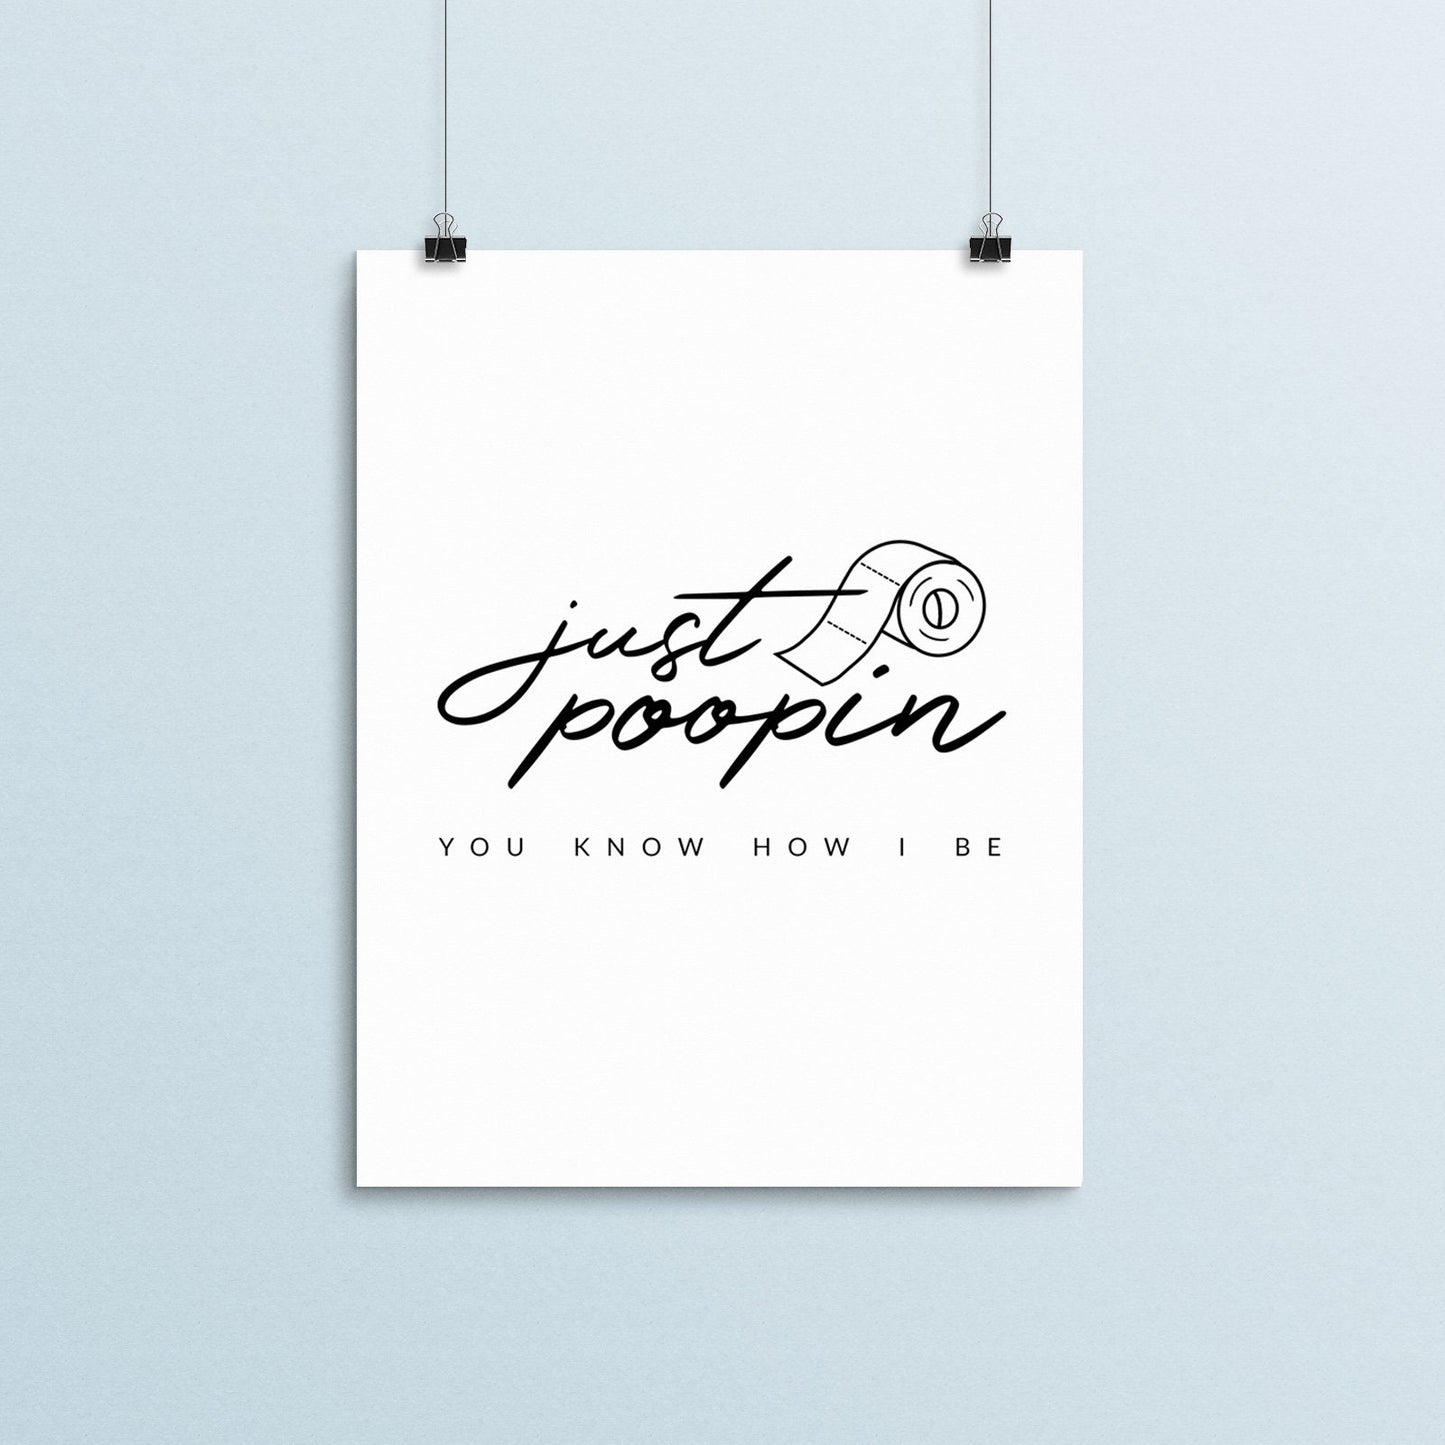 DIGITAL DOWNLOAD "Just poopin'. You know how I be." - Michael Scott, The Office Printable Bathroom Sign, Home Decor, Signage, Quotes